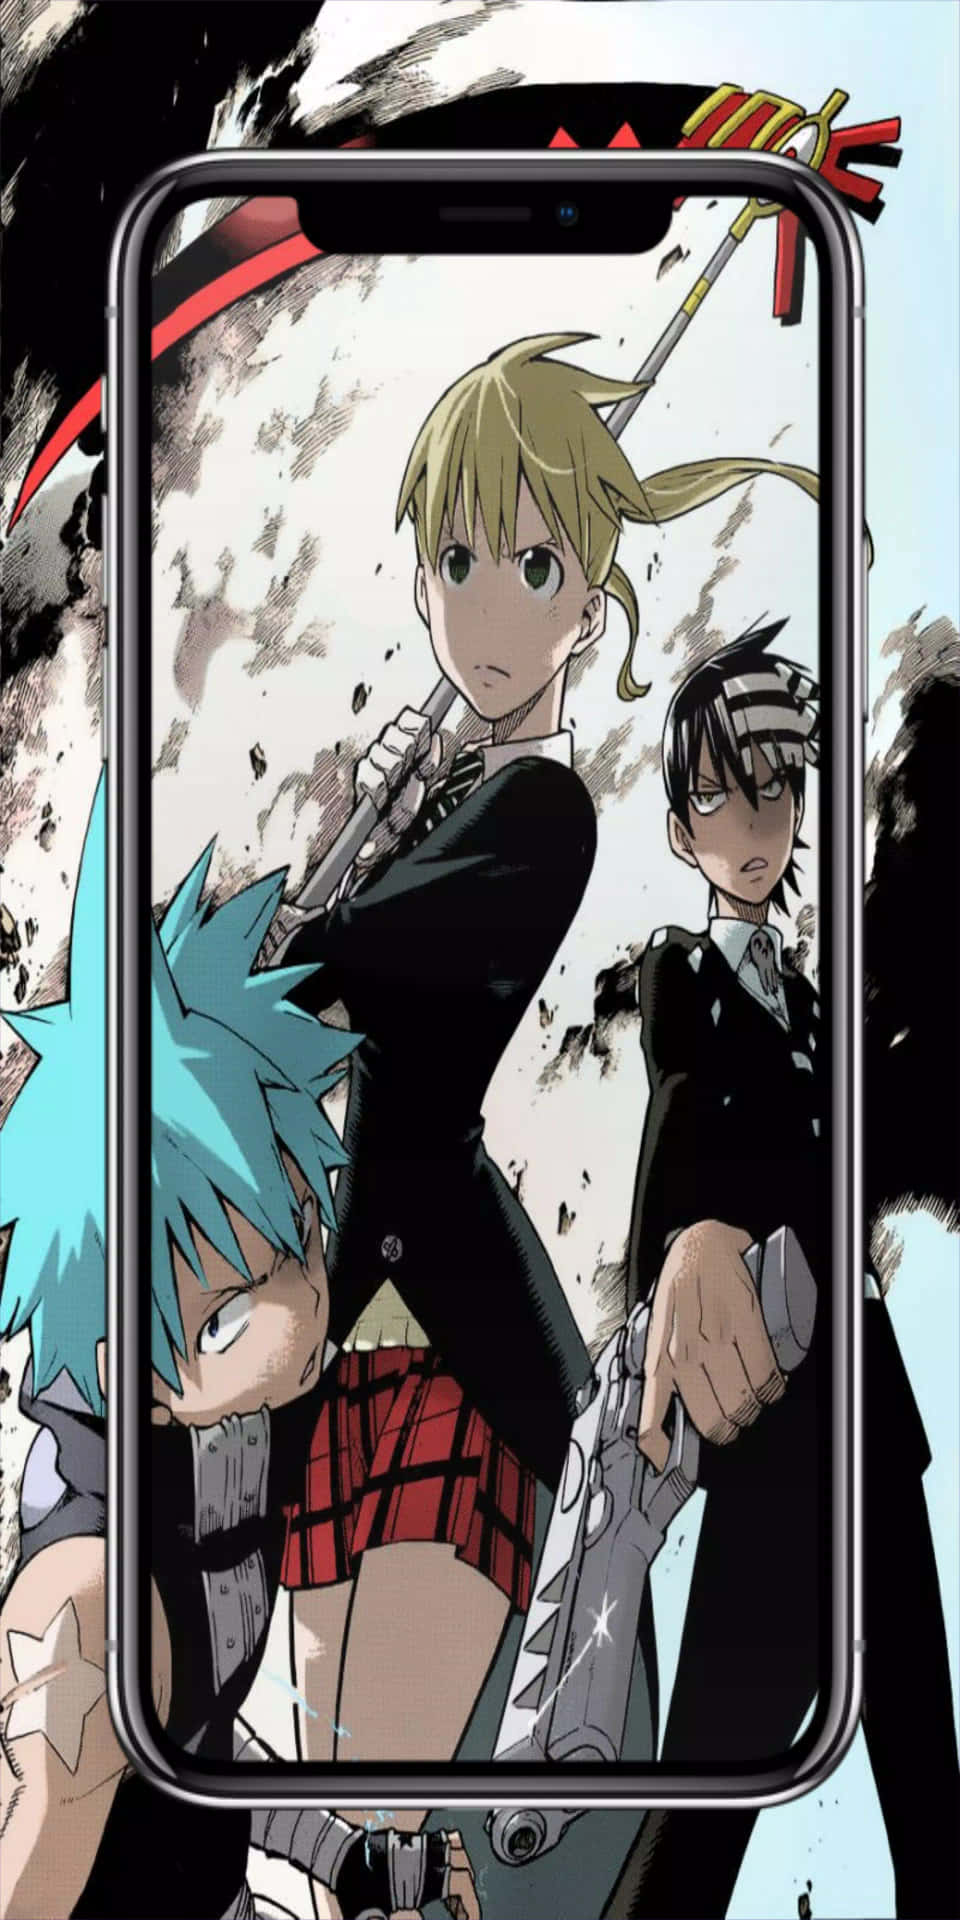 Follow Soul Eater as they embark on their journey together Wallpaper